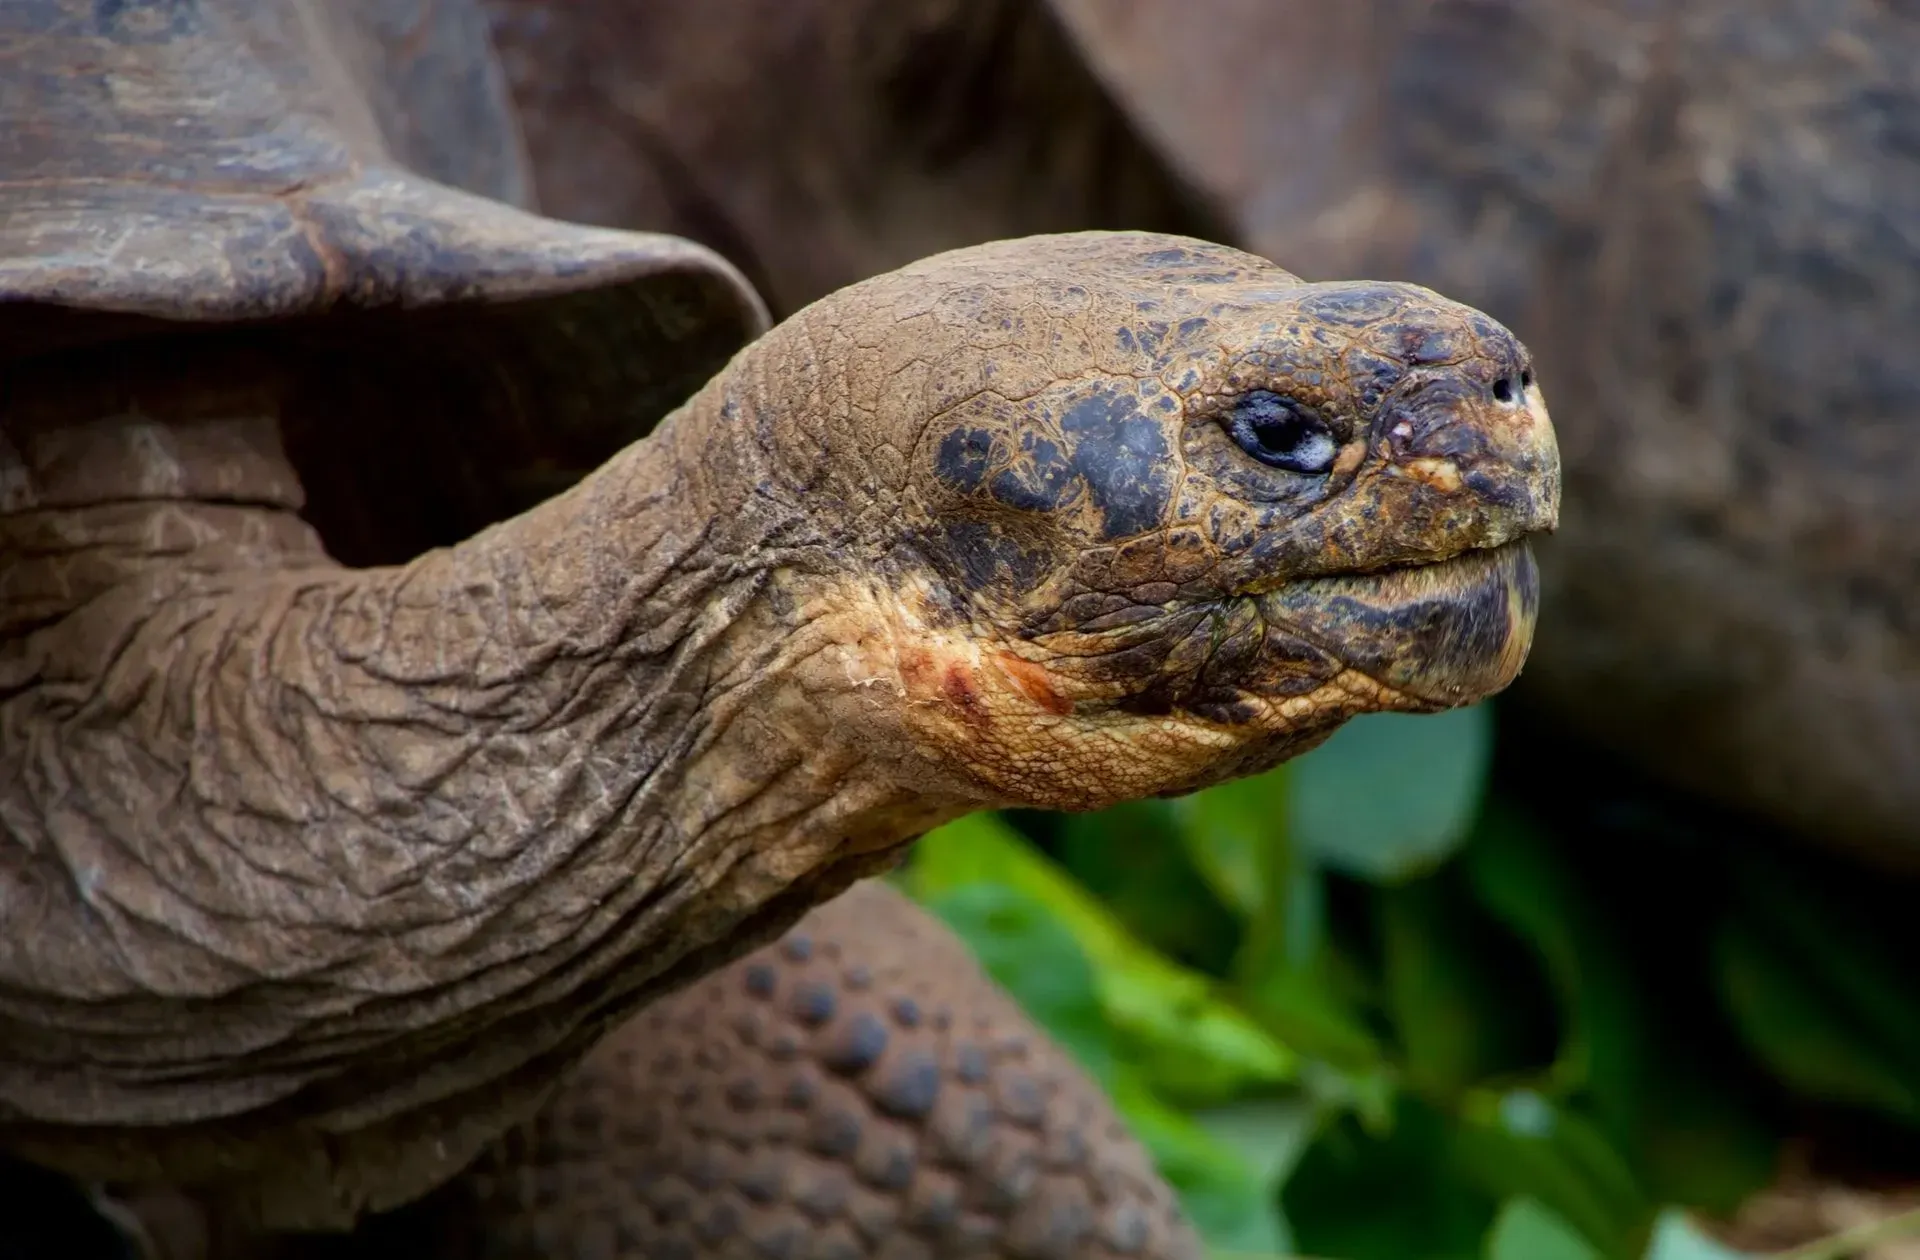 Close-up of the face of a tortoise.